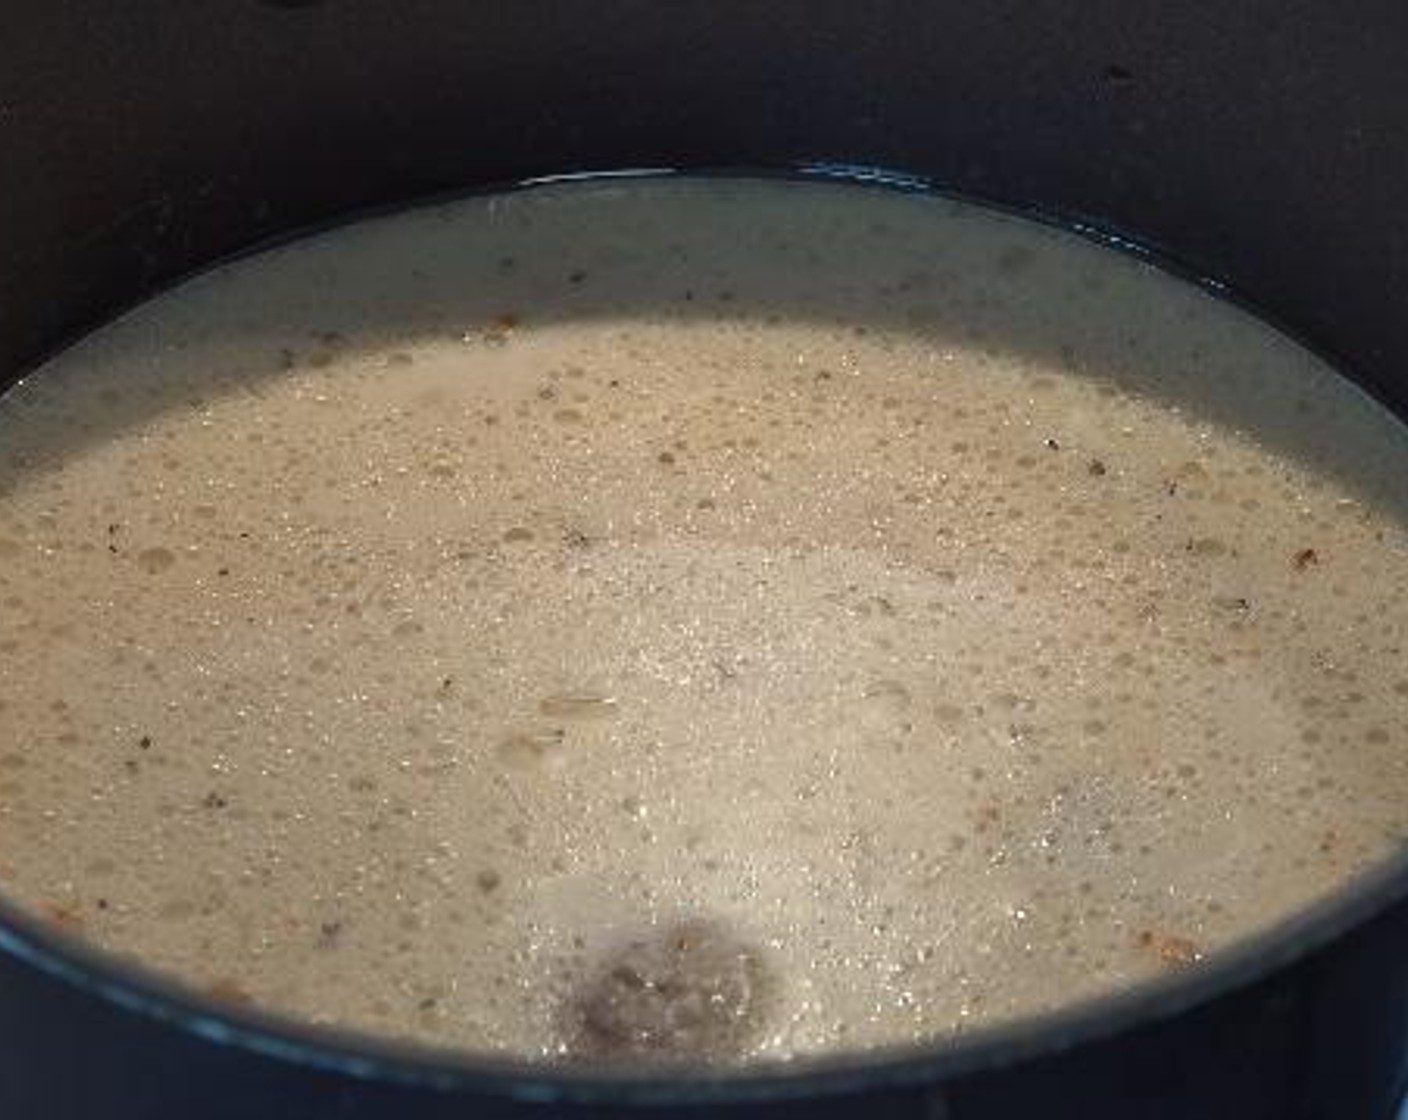 step 3 Into the pan, add the Beef Stock (2 cups), Milk (2 cups), Worcestershire Sauce (1 Tbsp), Salt (to taste), and Ground Black Pepper (to taste). Give the mixture a gentle stir and allow it to come to the boil.